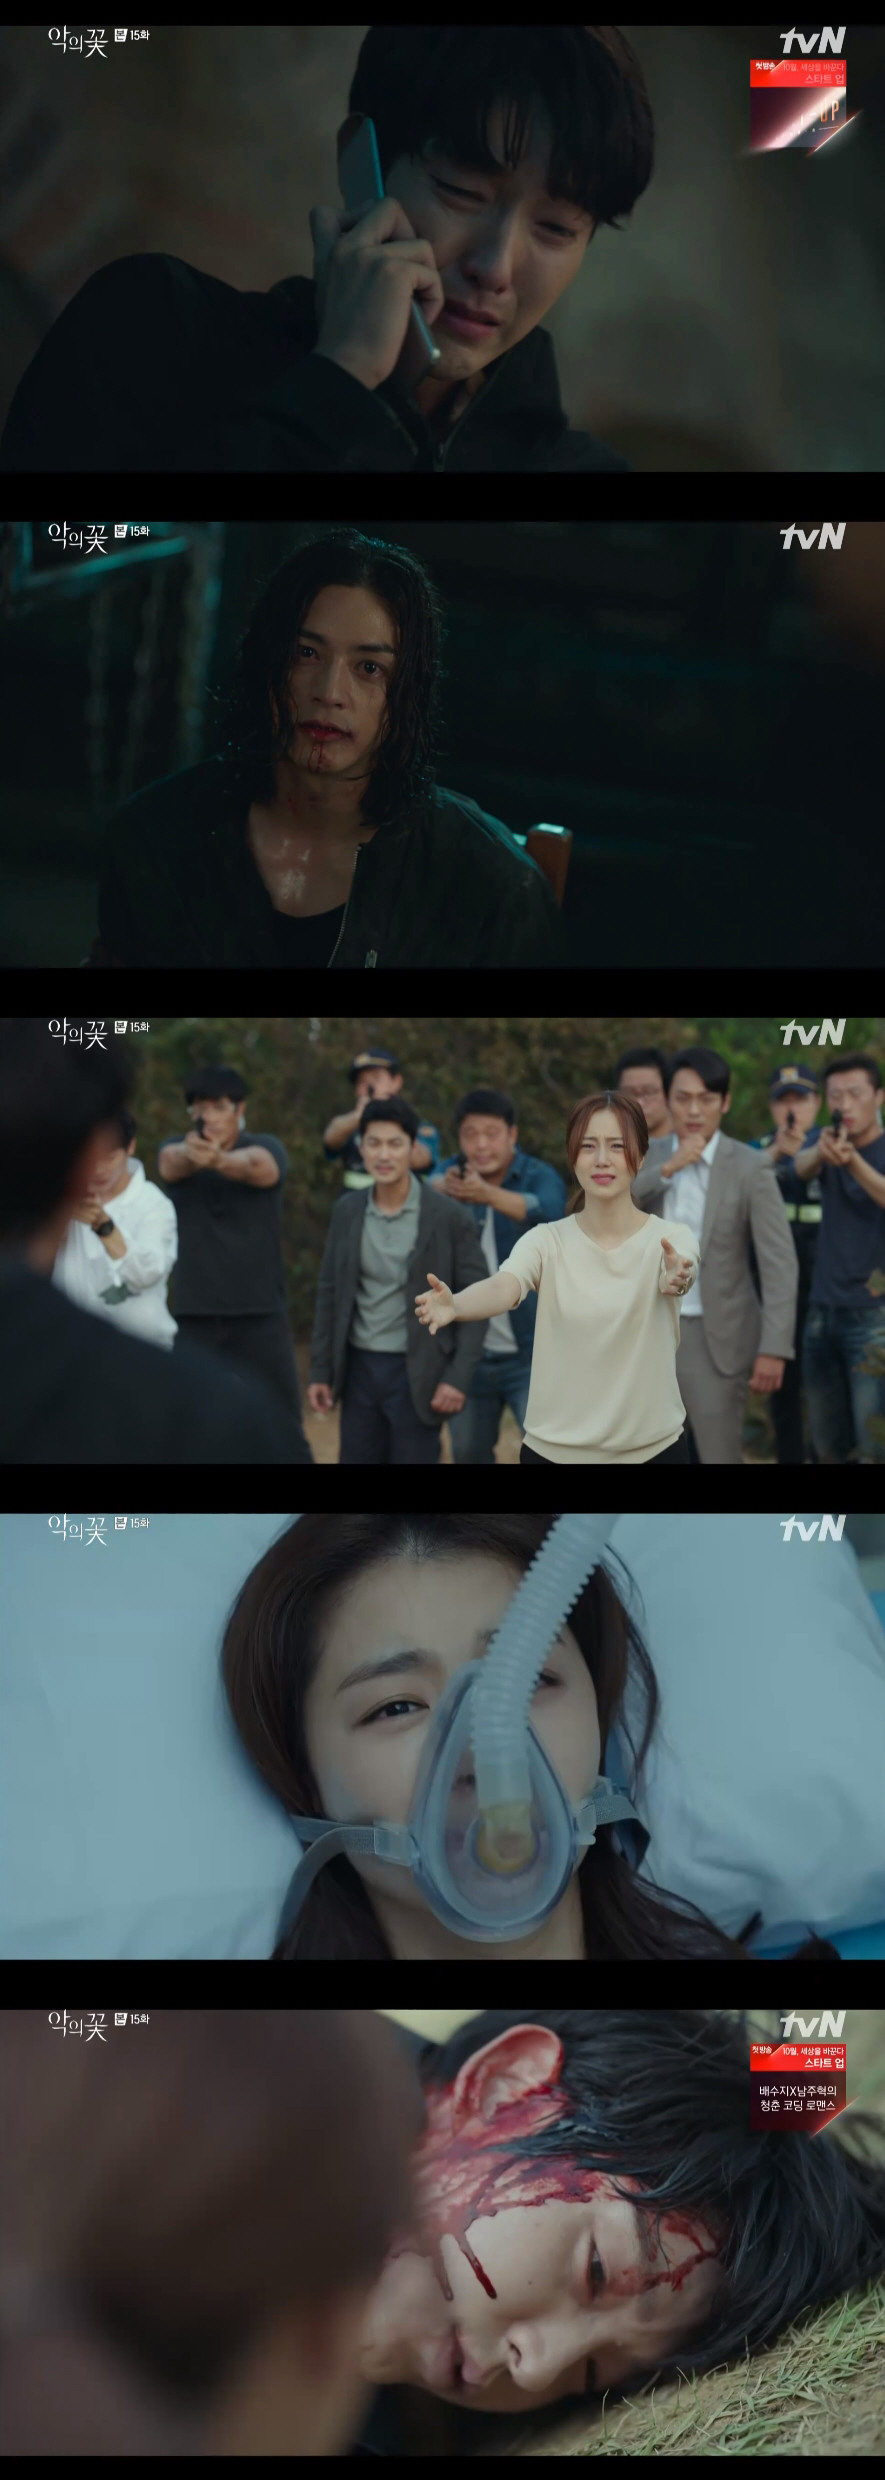 In the TVN drama Flower of Evil, Lee Joon-gi hinted at the end of a tough villain as Kim Ji-hoon was shot instead of Moon Chae-won.In Flower of Evil, which aired on the 17th, Do Hyun-soo (Lee Joon-gi) found the last survivor, Jung Mi-sook (Han Soo-yeon), who will prove the reality of Baek Hee-seong (Kim Ji-hoon) through a deal with Yeom Sang-cheol (Kim Ki-moo).Also, the trap he set up finally caught the Baek Hee-seong, and the case seemed to be finished.However, the frenzied provocation of Baek Hee-seong, who brought up the ID of his bloodied wife, Cha JiWon (Moon Chae-won), and the story of his daughter, made Do Hyun-soo increasingly lose his reason.It was the beginning of a sad misunderstanding that was encroached on the malice (intention) of the Baek Hee-seong.Do Hyun-soos fever, which confirmed the news that Cha JiWon had died and spat out a grieving groan, was more woeful than ever, which made even viewers watching her cry.Do Hyun-soo, who returned to empty eyes like the past, picked up the knife and revealed his intention to Baek Hee-seong.Jung Mi-sook caught Do Hyun-soo who tried to make irreversible choice, and Baek Hee-seong ran away for a moment, but it was not enough to escape from Do Hyun-soo with an uncomfortable body.On the other hand, Kim Moo-jin (Seo Hyun-woo), who knew that the criminal who hurt Do Hae-soo (Jang Hee-jin) was Baek Hee-seong, burst into anger at Baek Man-woo (Son Jong-hak), who pretended not to know his sons nature, and Gong Mi-ja (Nam Ki-ae).This was also a remark to Kim Moo-jin himself, who ignored the truth in fear, who believed that the identity of the sack seen in the basement of Do Min-seok (Choi Byung-mo), a young murderer, was not a person but an elk.Cha JiWon and the police, who figured out the truth of the incident, moved with all their might, and Do Hyun-soo and Baek Hee-seong reached the end of the cliff. It was the last stage to end the long and long bad performance.Cha JiWons voice stopped him when Do Hyun-soo, who was stained with sadness and pain while exhaling life, finally raised his knife toward Baek Hee-seong.However, Do Hyun-soo, who suffered from the ghost of his dead father again, could not distinguish whether she was real or created by herself.Cha JiWon, who saw him suffering, also persuaded him with a tearing heart, and Do Hyun-soo, who still had confused eyes, slowly approached her.At that point, Baek Hee-Seong took the gun from the police who came to overpower him.Do Hyun-soo saw the gun toward Cha JiWon and blew up and wrapped her around her, and the police also shot him the moment Baek Hee-seong pulled the trigger.After two quick gunshots, Dohae opened his eyes, and Do Hyun-soo closed his eyes with his head covered in blood.With the end of Do Hyun-soo, who was greeted from the cliff, the screen reflected the pure white space as if it were the consciousness of Do Hyun-soo, who was at rest.Do Hyun-soo, who slept with a happy smile on Cha JiWons warm words, Now rest easy, was deeply lulled.In the trailer, Do Hyun-soo, who changed the atmosphere somewhere, appeared and had both relief and curiosity.Do Hyun-soo, who is in court, will tell the story at the final meeting of the 23rd (Wednesday) next week about what other situations he faces and what the two people who have been constantly drawing love between doubt and faith will come to an end.On the other hand, the average of 5.5% of Seoul Capital Area households (Nilson Korea) and 6.2% of the total, and the average of all states households was 5.1% and 6.0%.TVN target men and women 2049 ratings were 2.5% on average for Seoul Capital Area, 2.9% on average, 2.8% on All States and 3.4% on average.